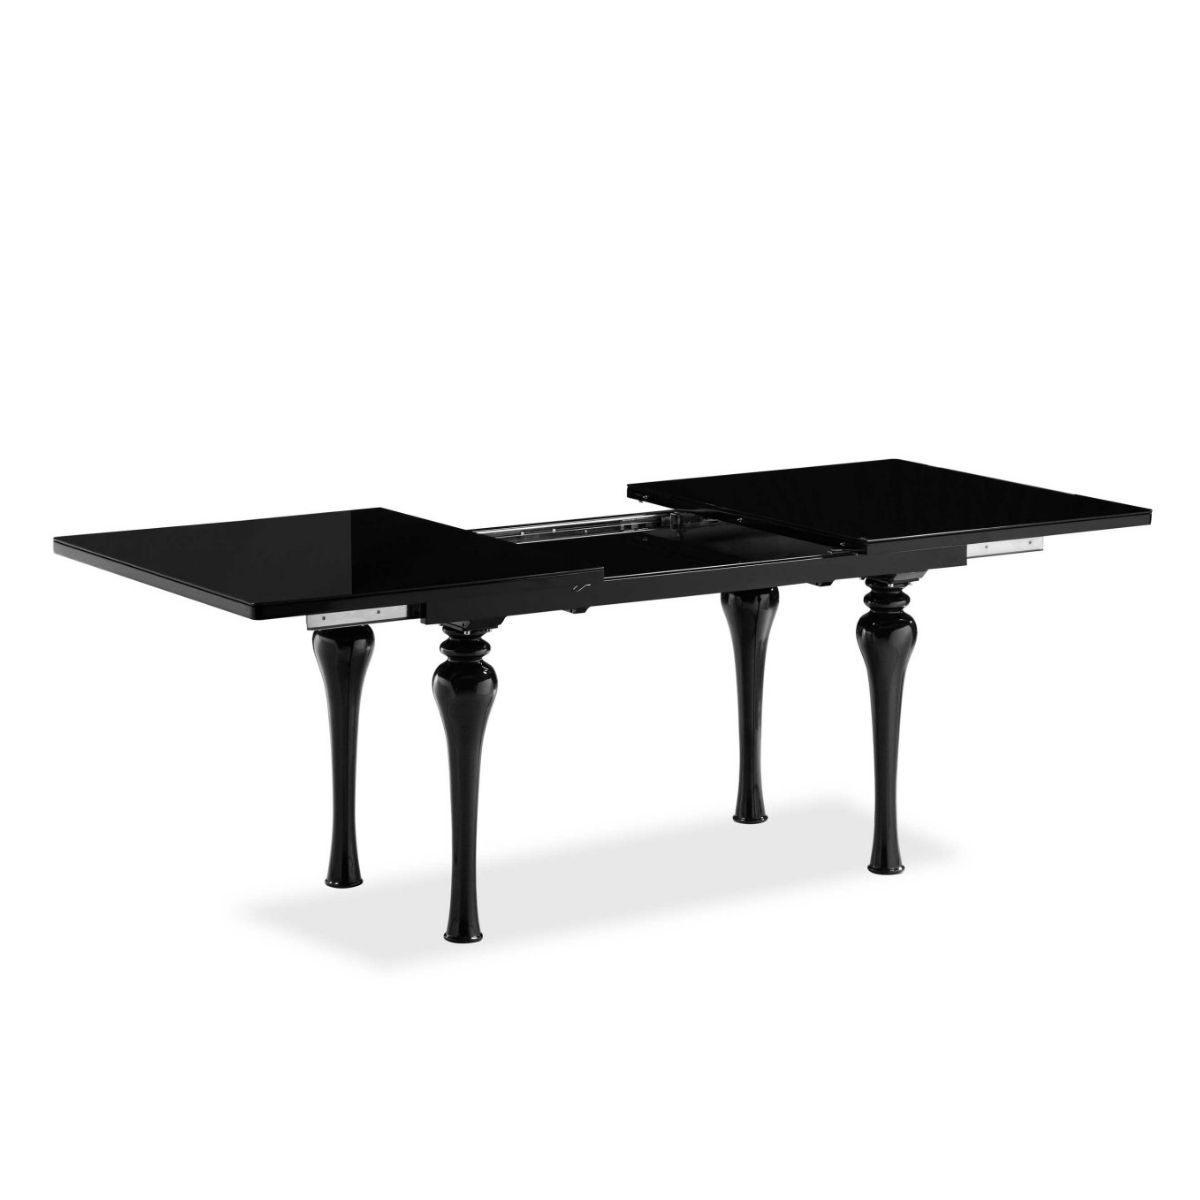 Laurent Upholstered Side Chairs With Preferred Laurent Black High Gloss Dining Table – Gloss Furniture (View 15 of 20)